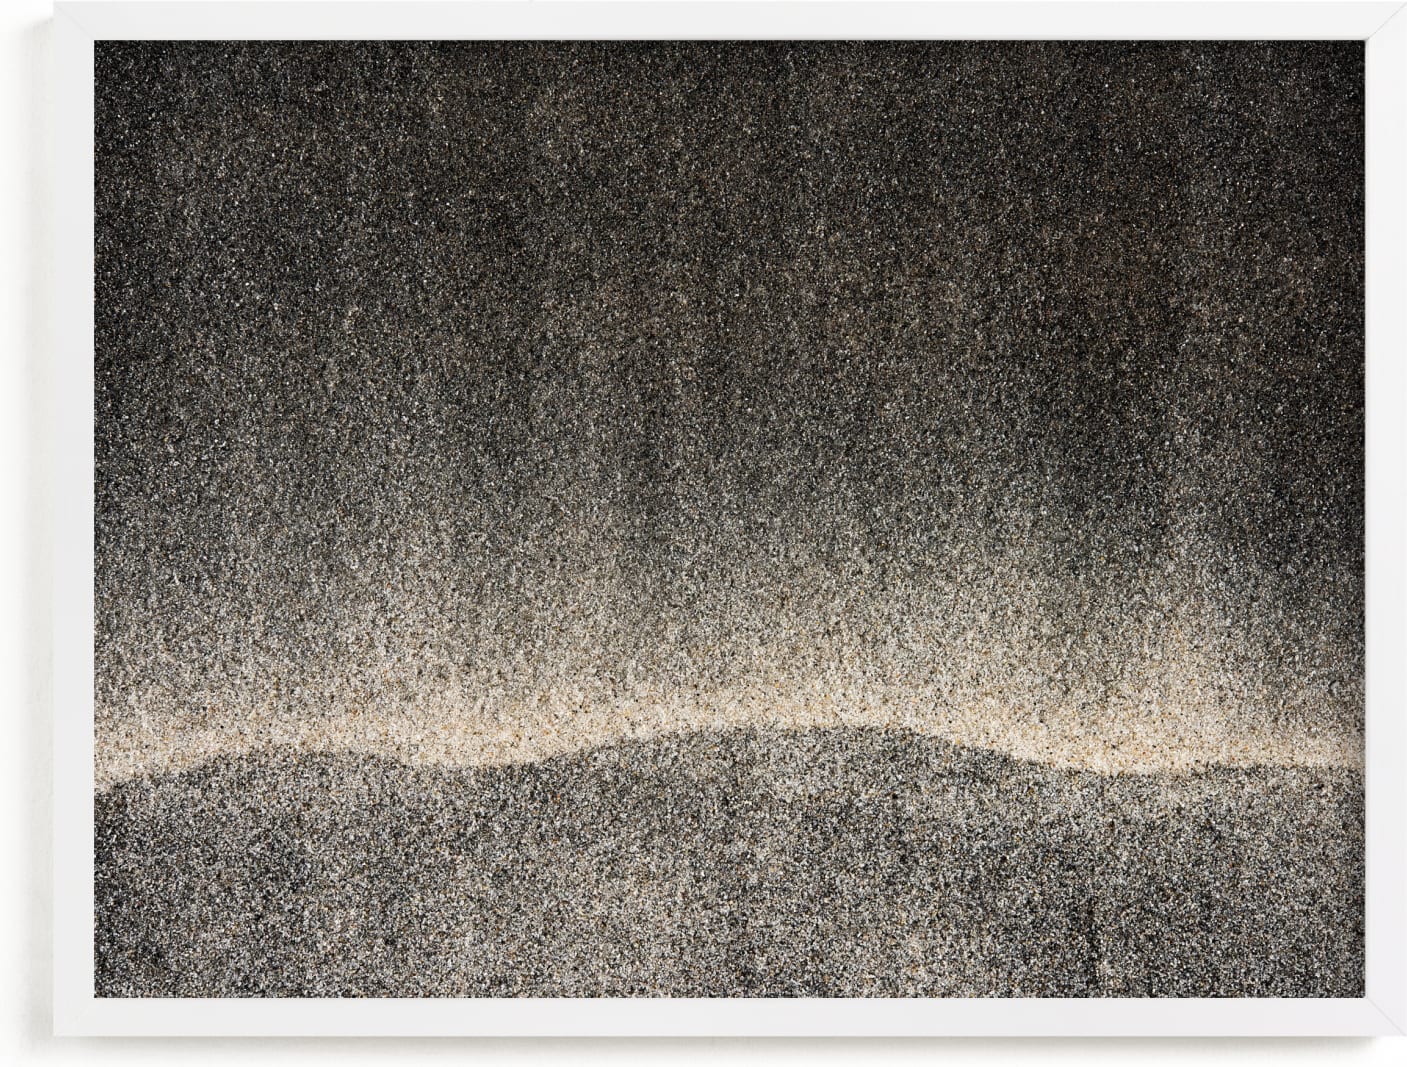 This is a black and white kids wall art by Chris Benjamin called Sandscape 46.